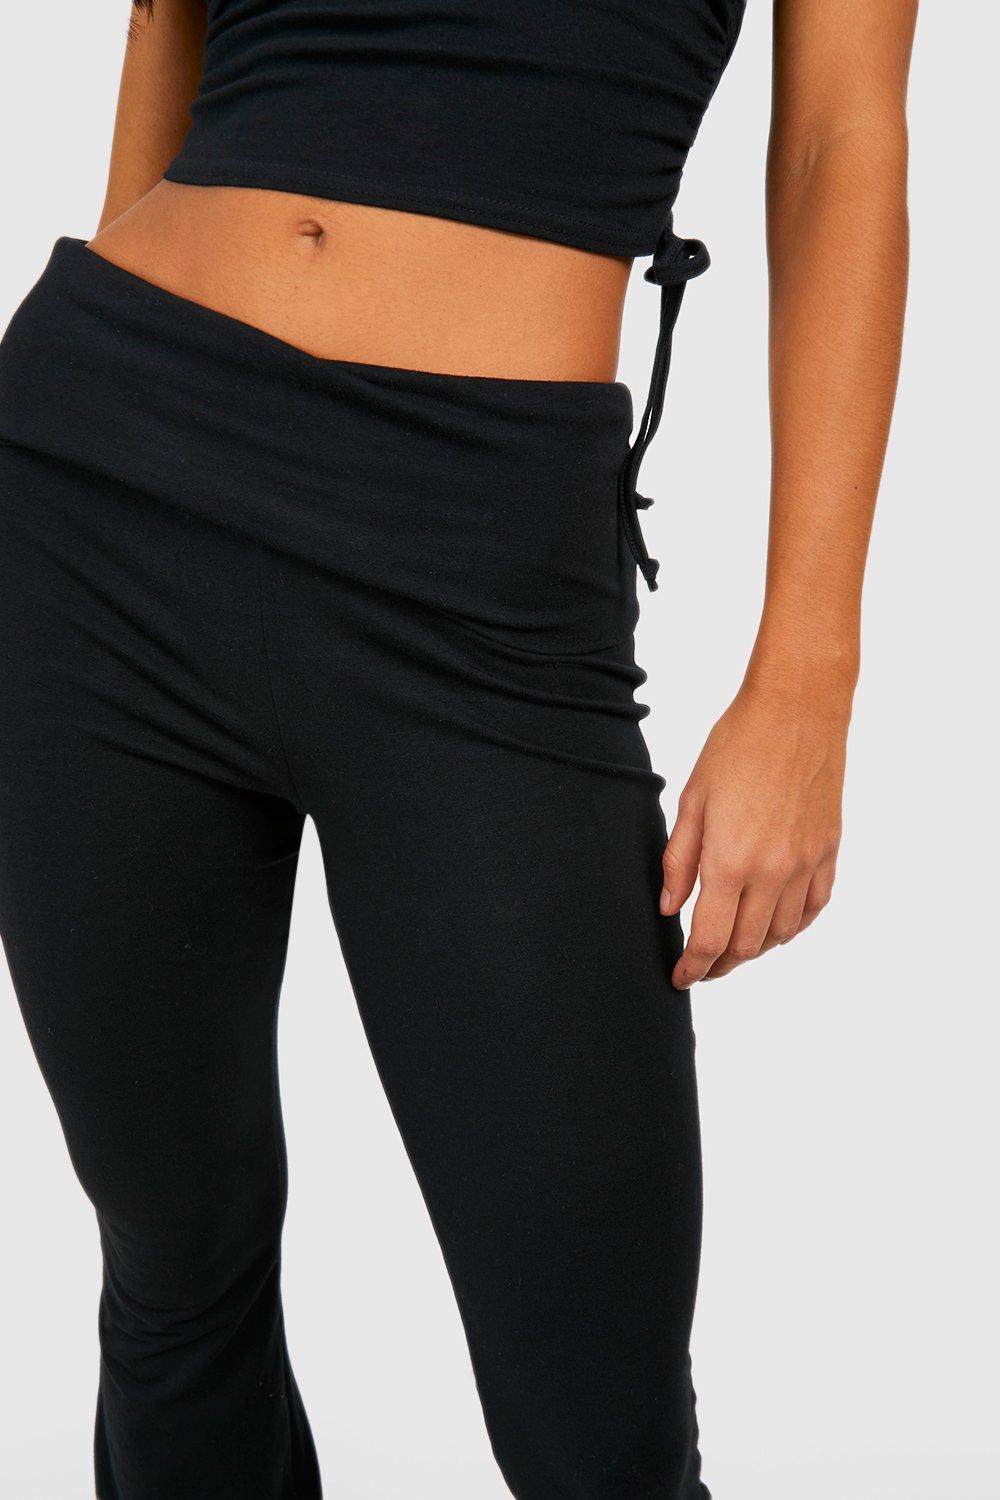 VSPINK cotton foldover flare leggings!! THANK ME LATER. size xs, shor, fold over flare pants